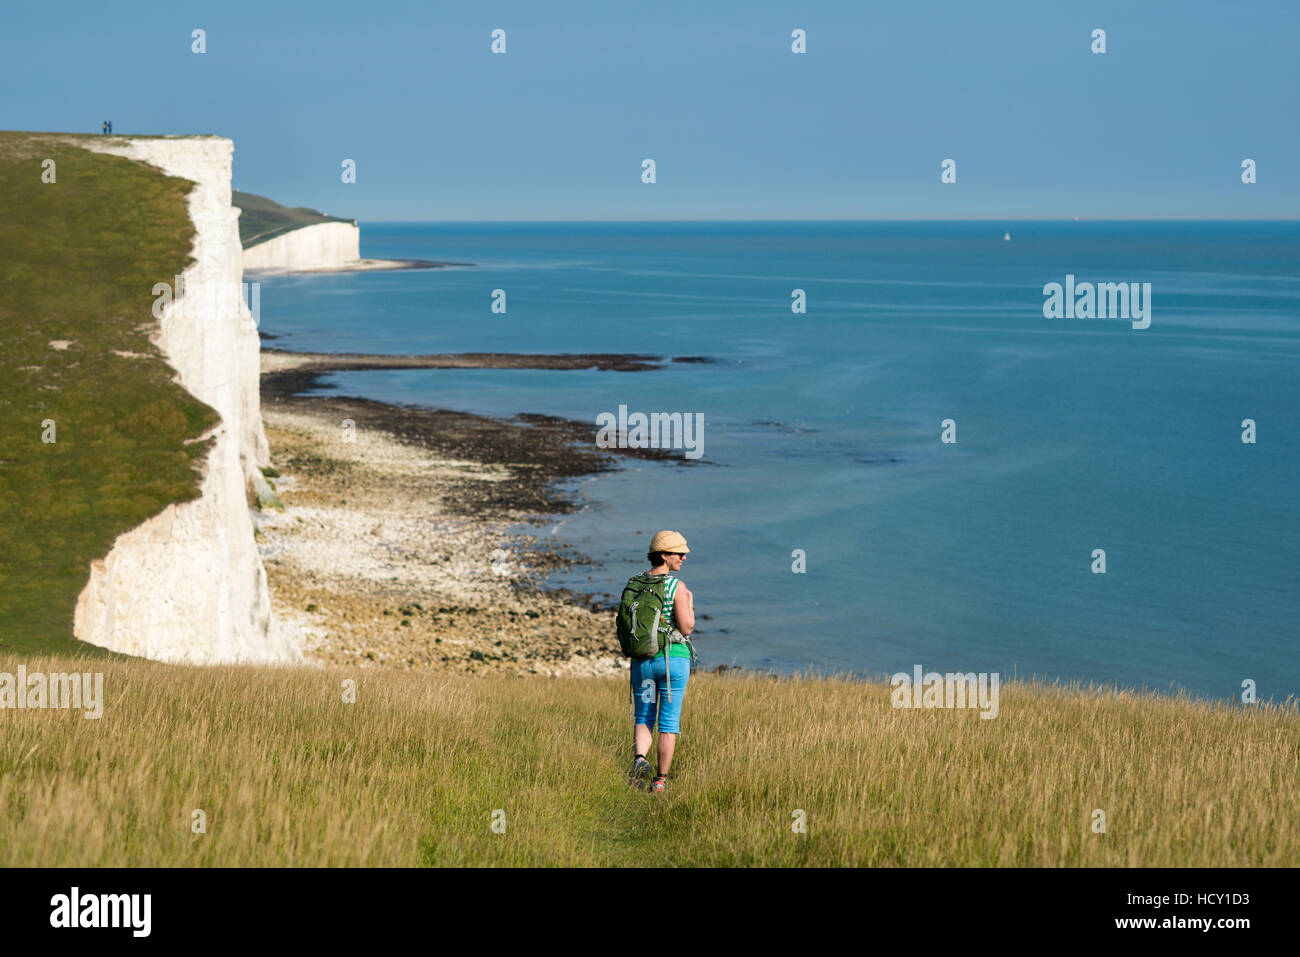 A woman walks along the cliffs near Beachy Head with views of the Seven Sisters coastline, South Downs National Park, UK Stock Photo